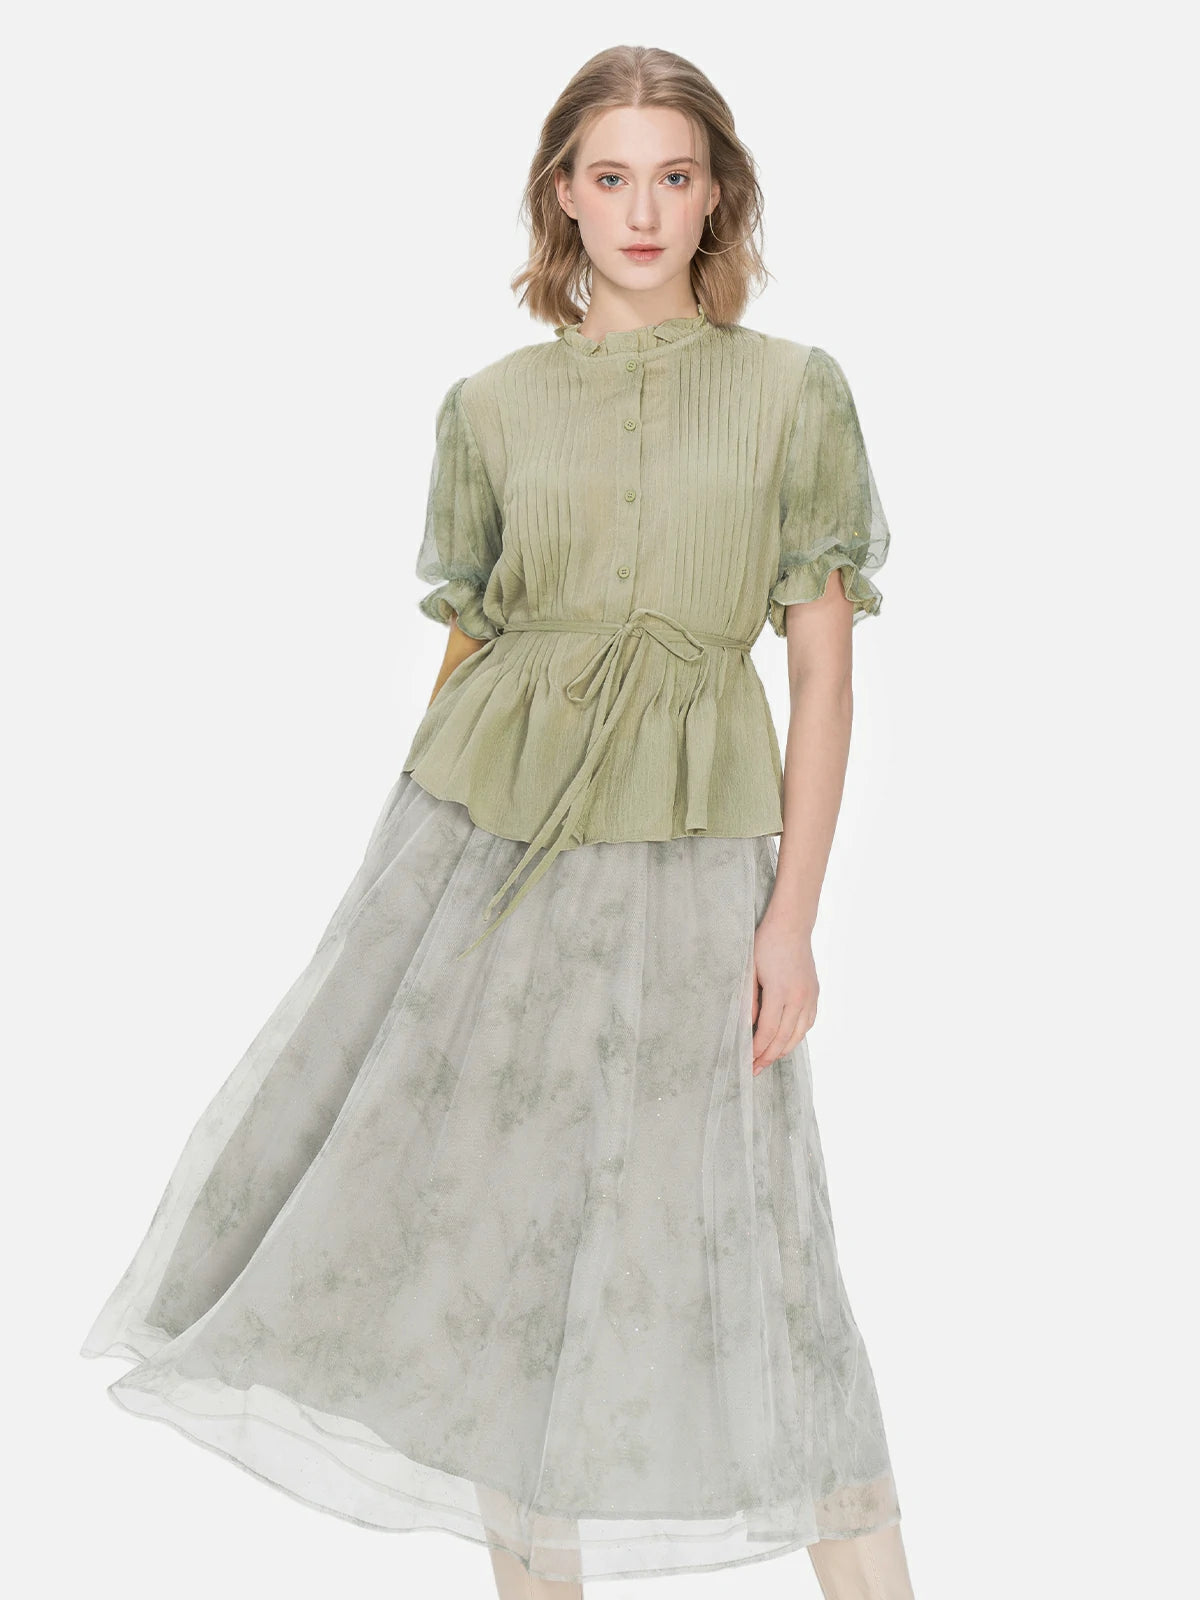 Stylish short-sleeved blouse in green with a waist tie, accordion pleat detailing, and mesh bubble sleeves for a fashionable appearance.